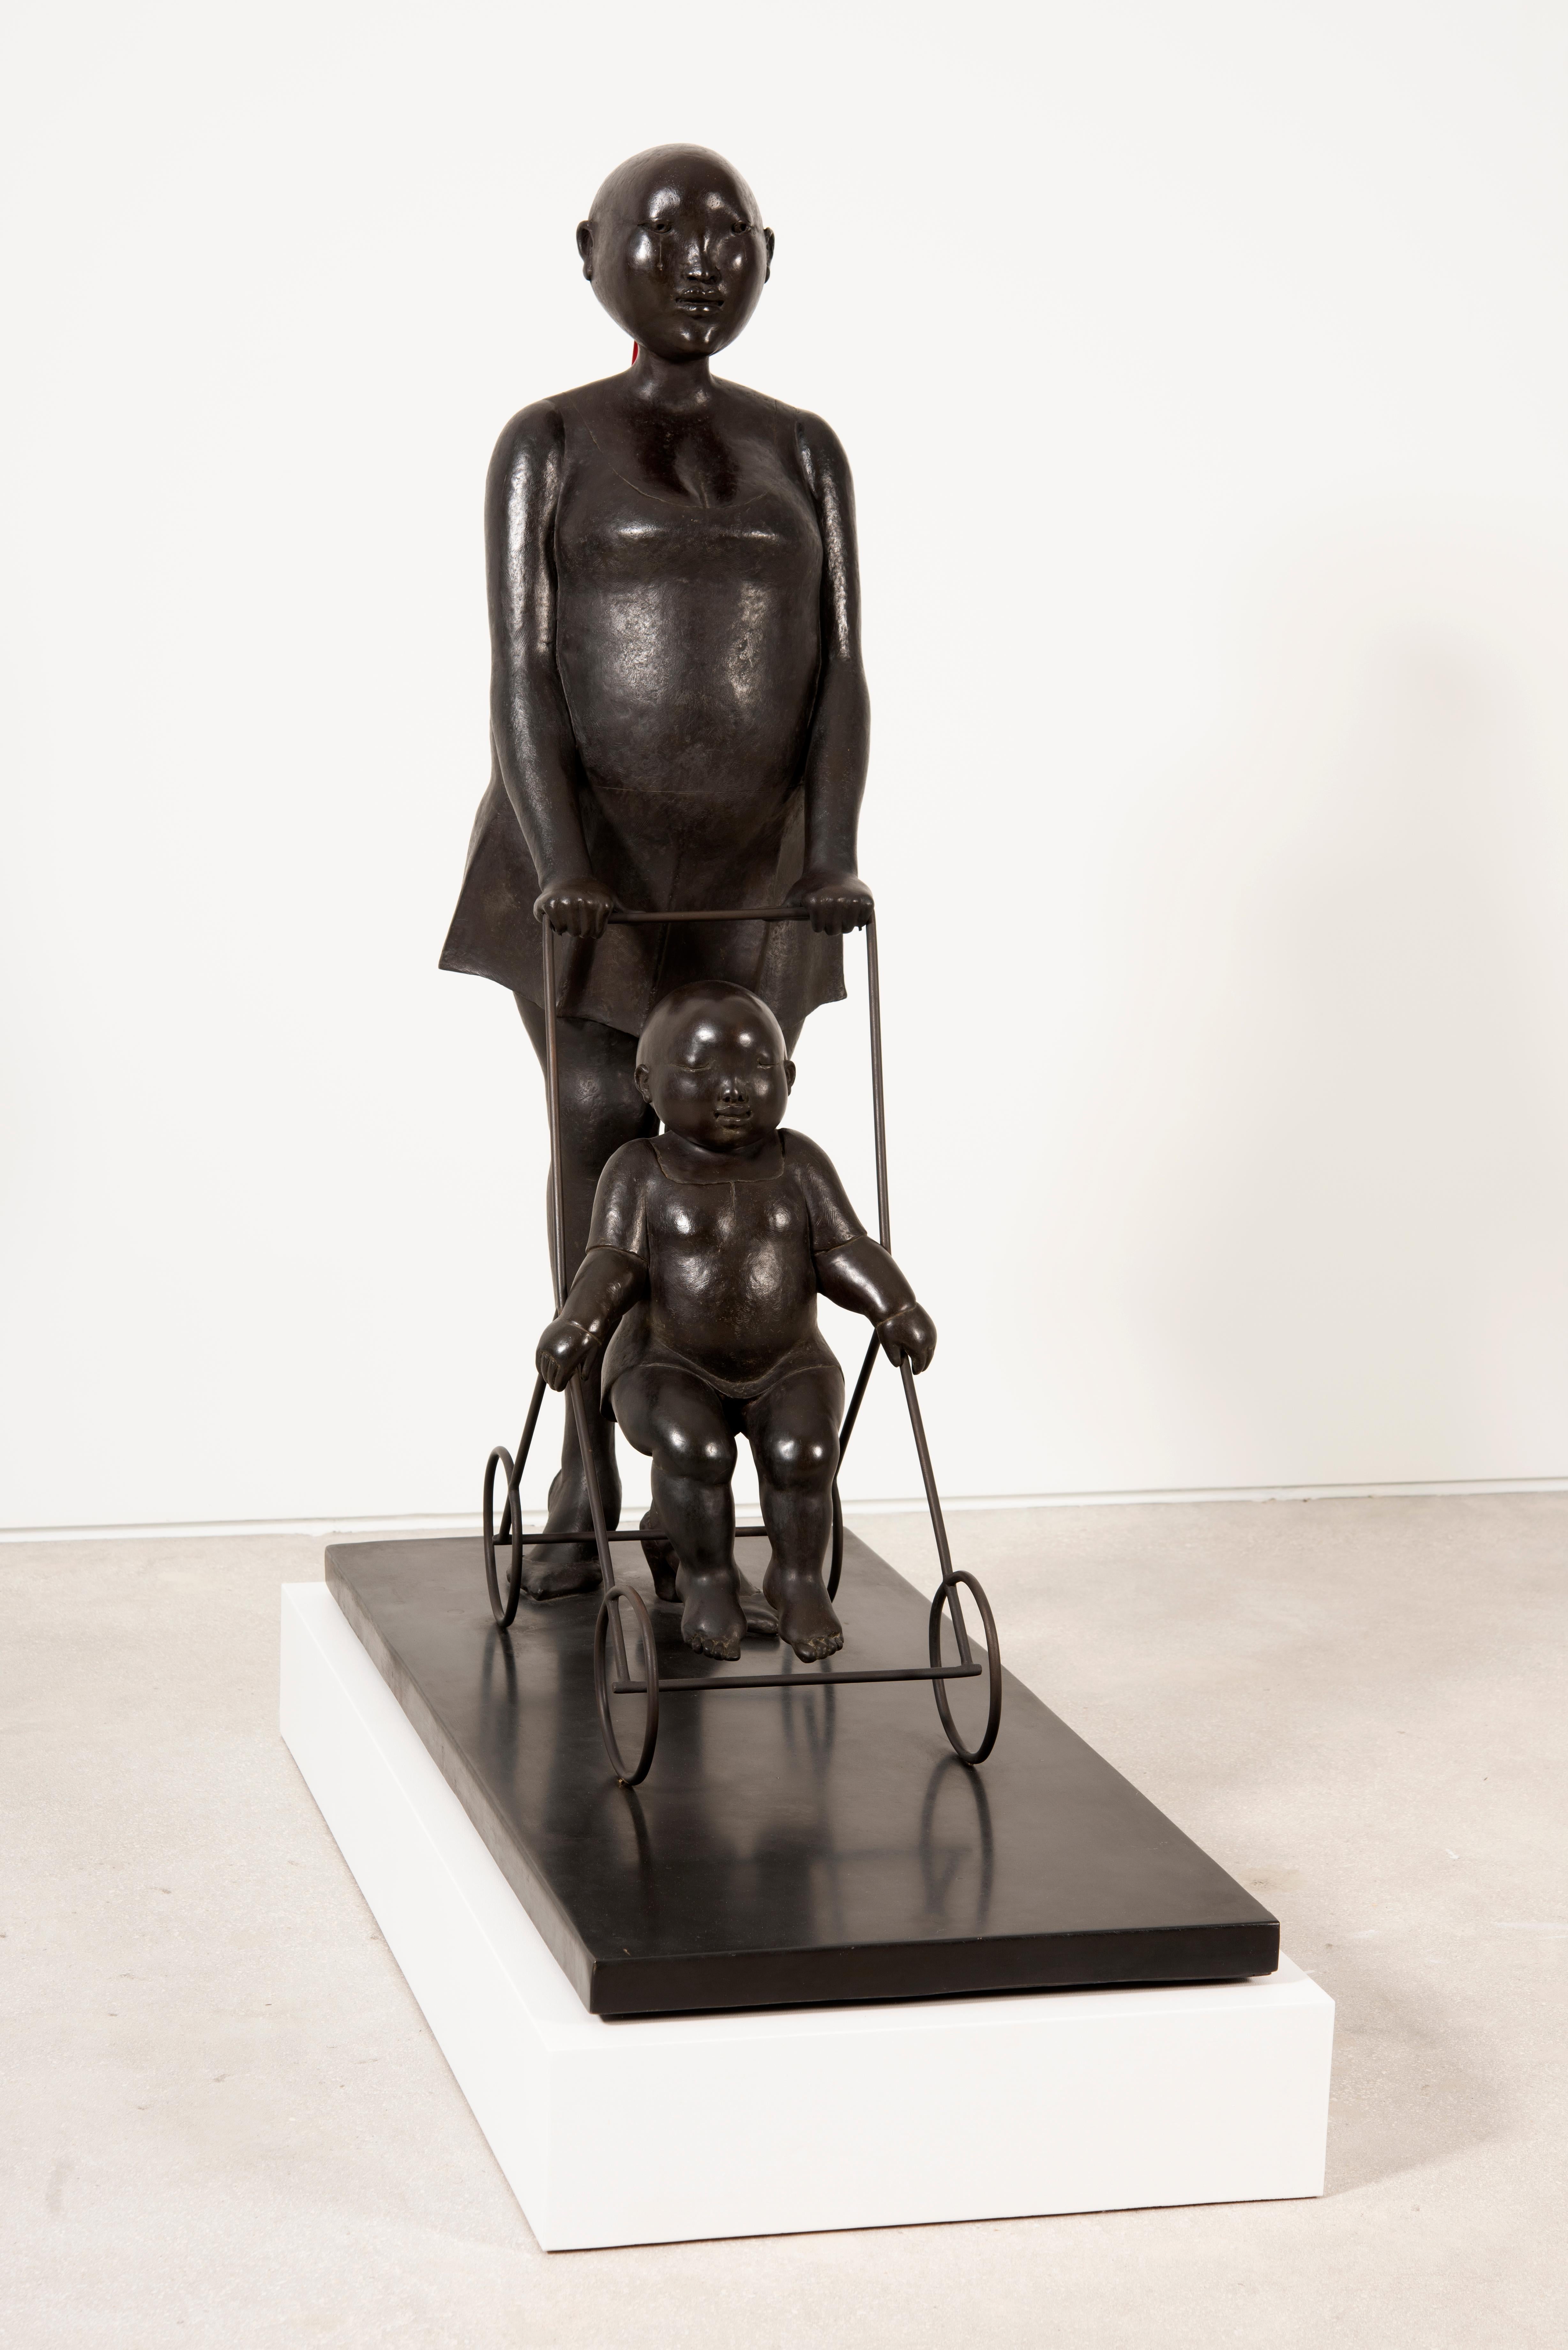 Cornelis Zitman
Divertimiento, 1973 
Bronze, AP 
72 x 34 x 45 cm 
28.3 x 13.3 x 17.7 in.

Cornelis Zitman (1926-2016)
Born in Leiden in a family of builders, he enters the Fine Arts Academy of Hague at age 15. After completing his studies in 1947,